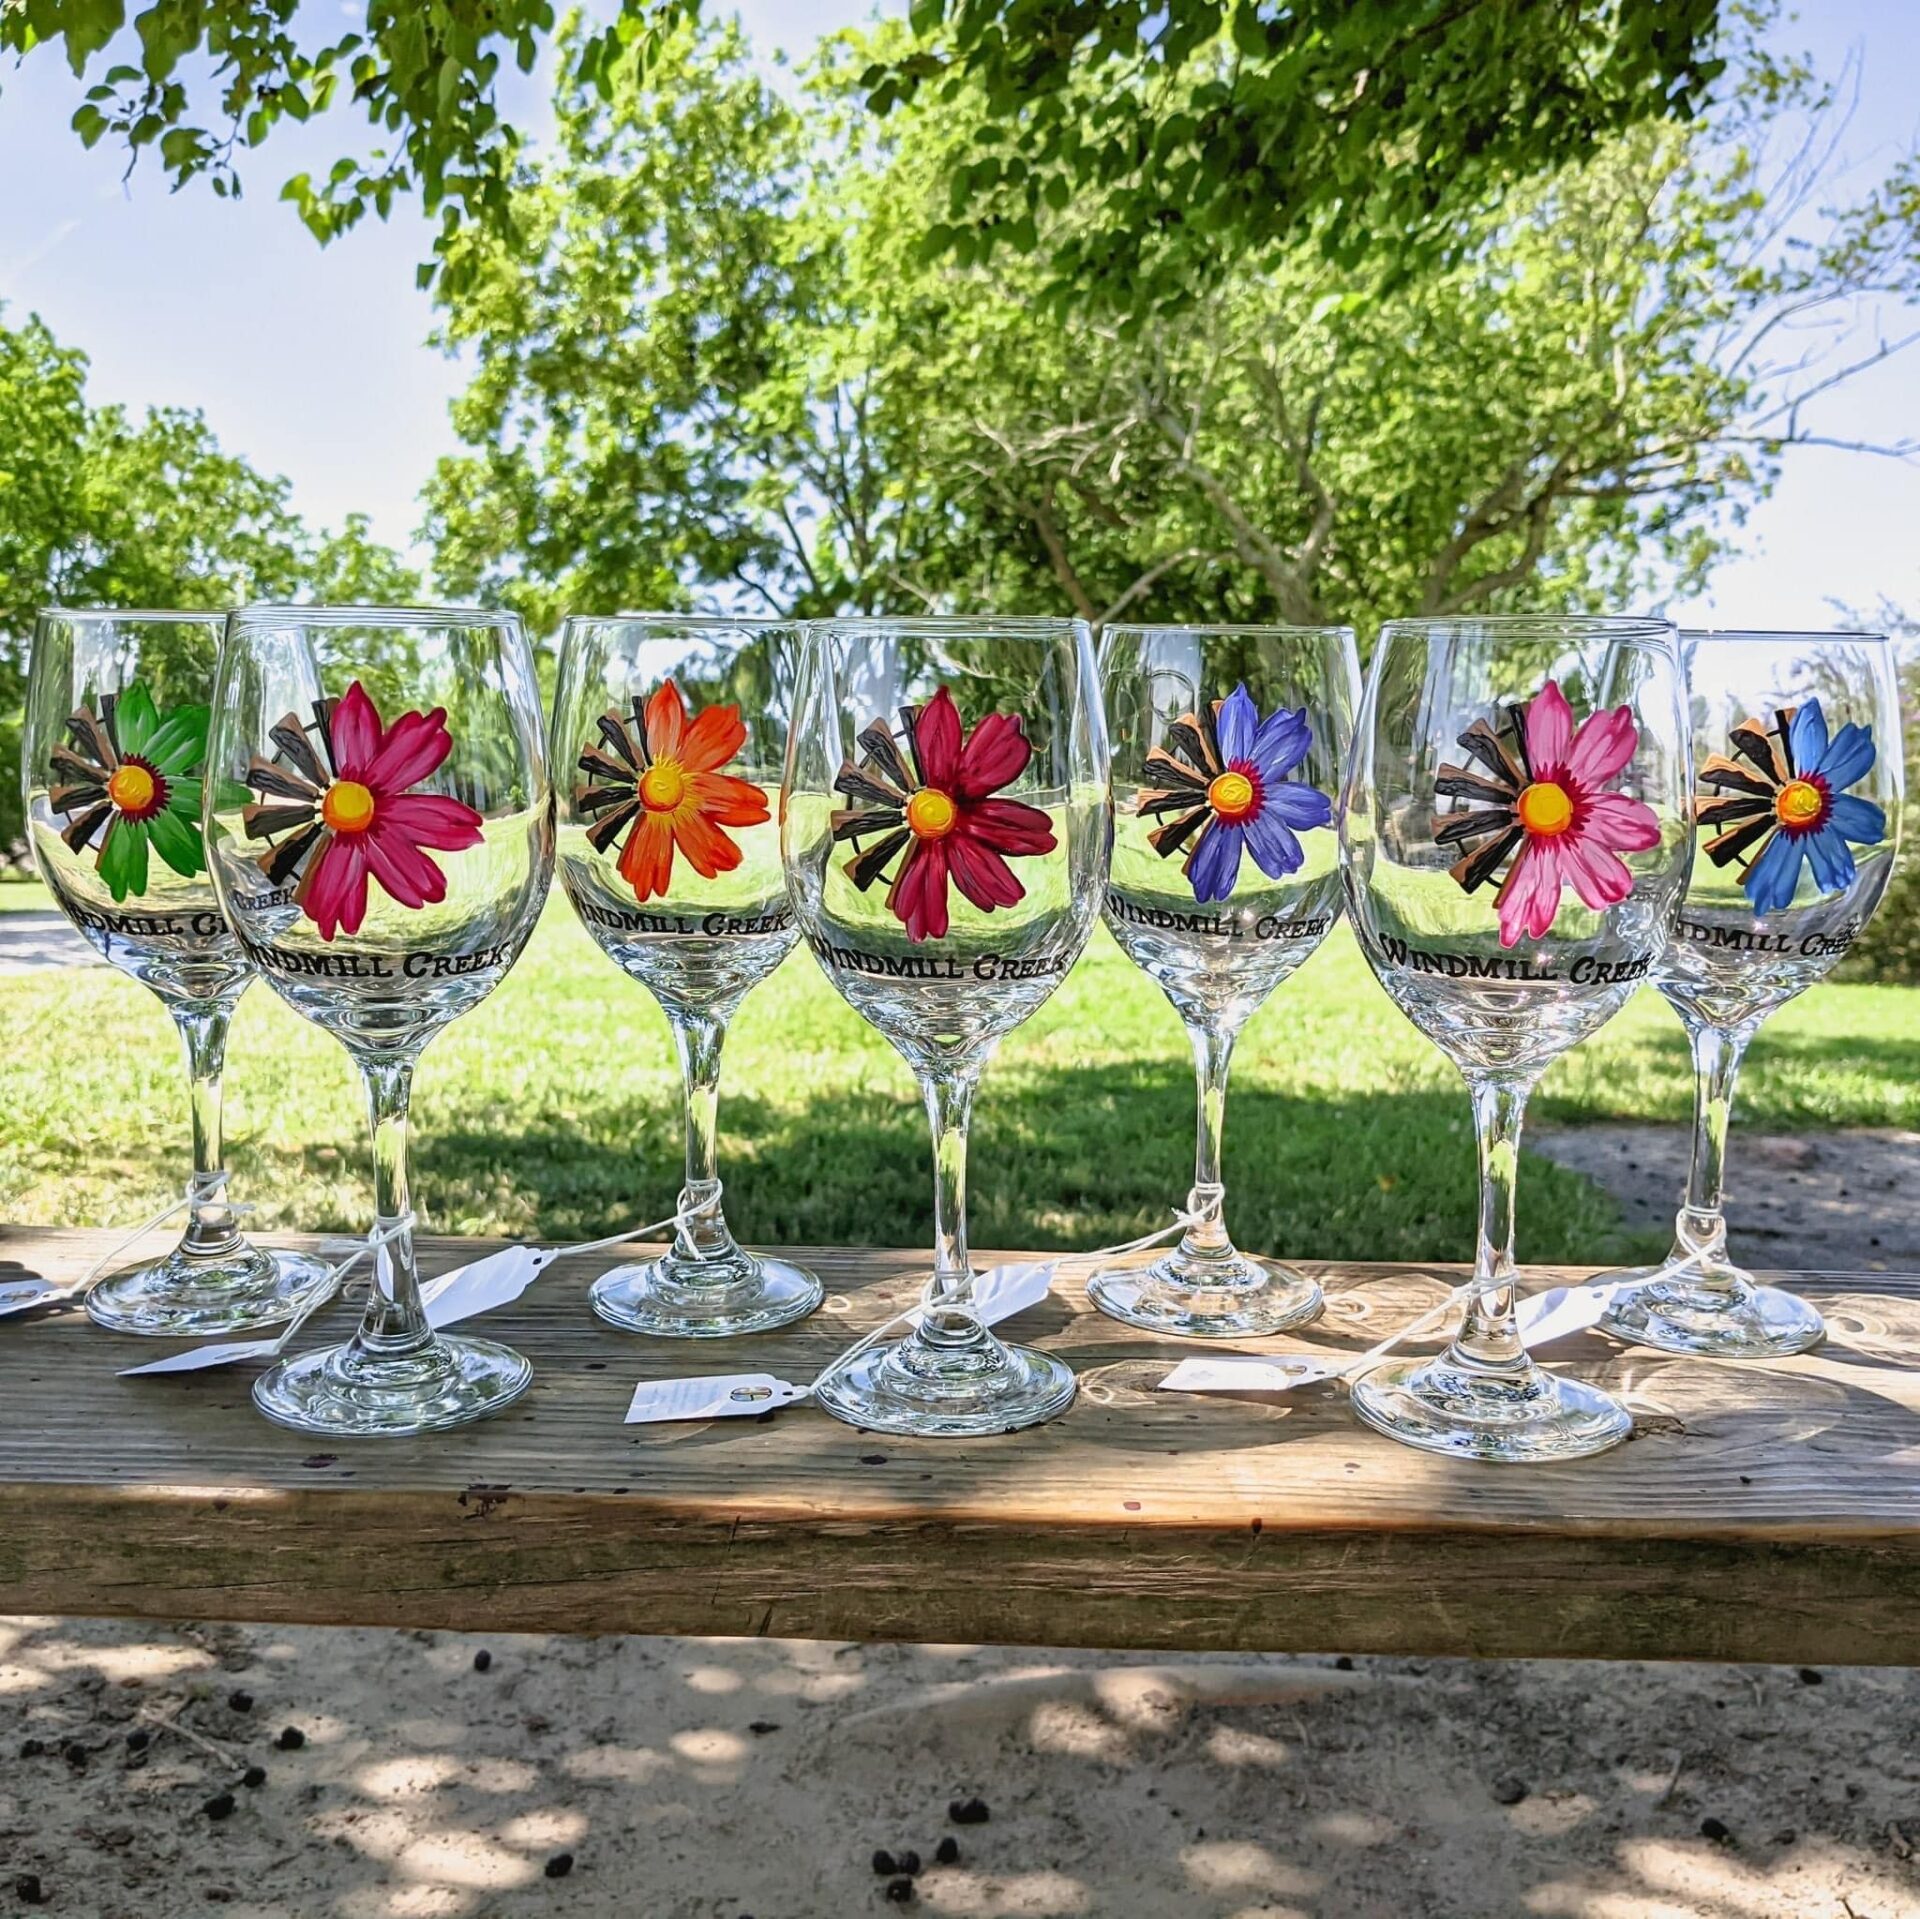 Picture of wine glasses on table